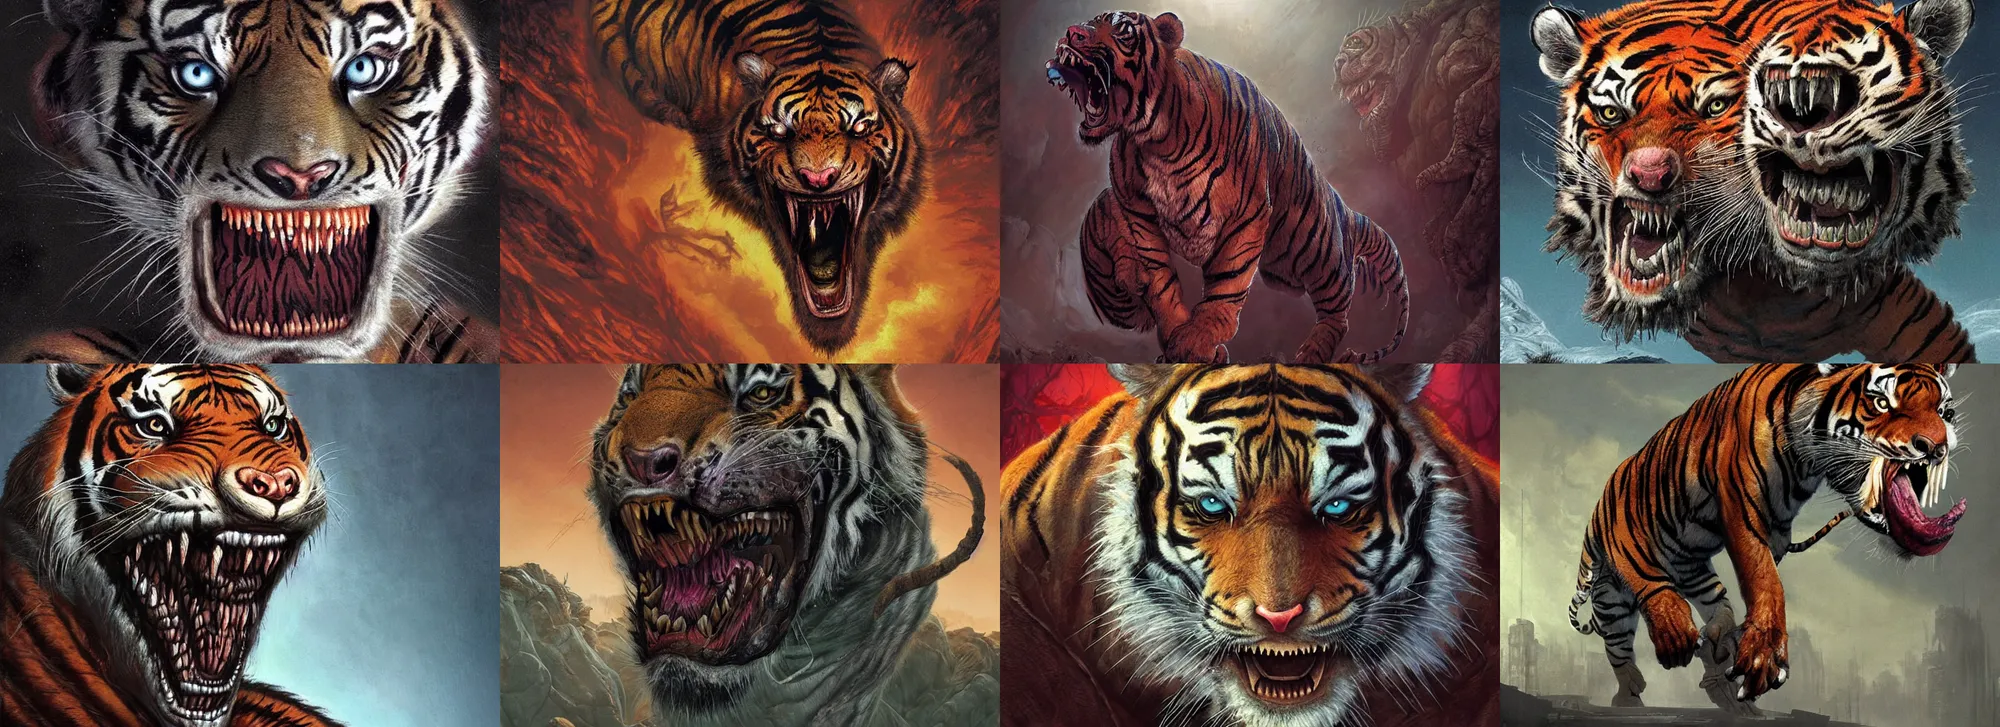 Prompt: a nightmarish mutated tiger, with mouth open, looking down at you hungrily, by neville page and wayne barlowe, ( ( ( horror art ) ) ), wide angle, dramatic lighting, highly detailed digital painting